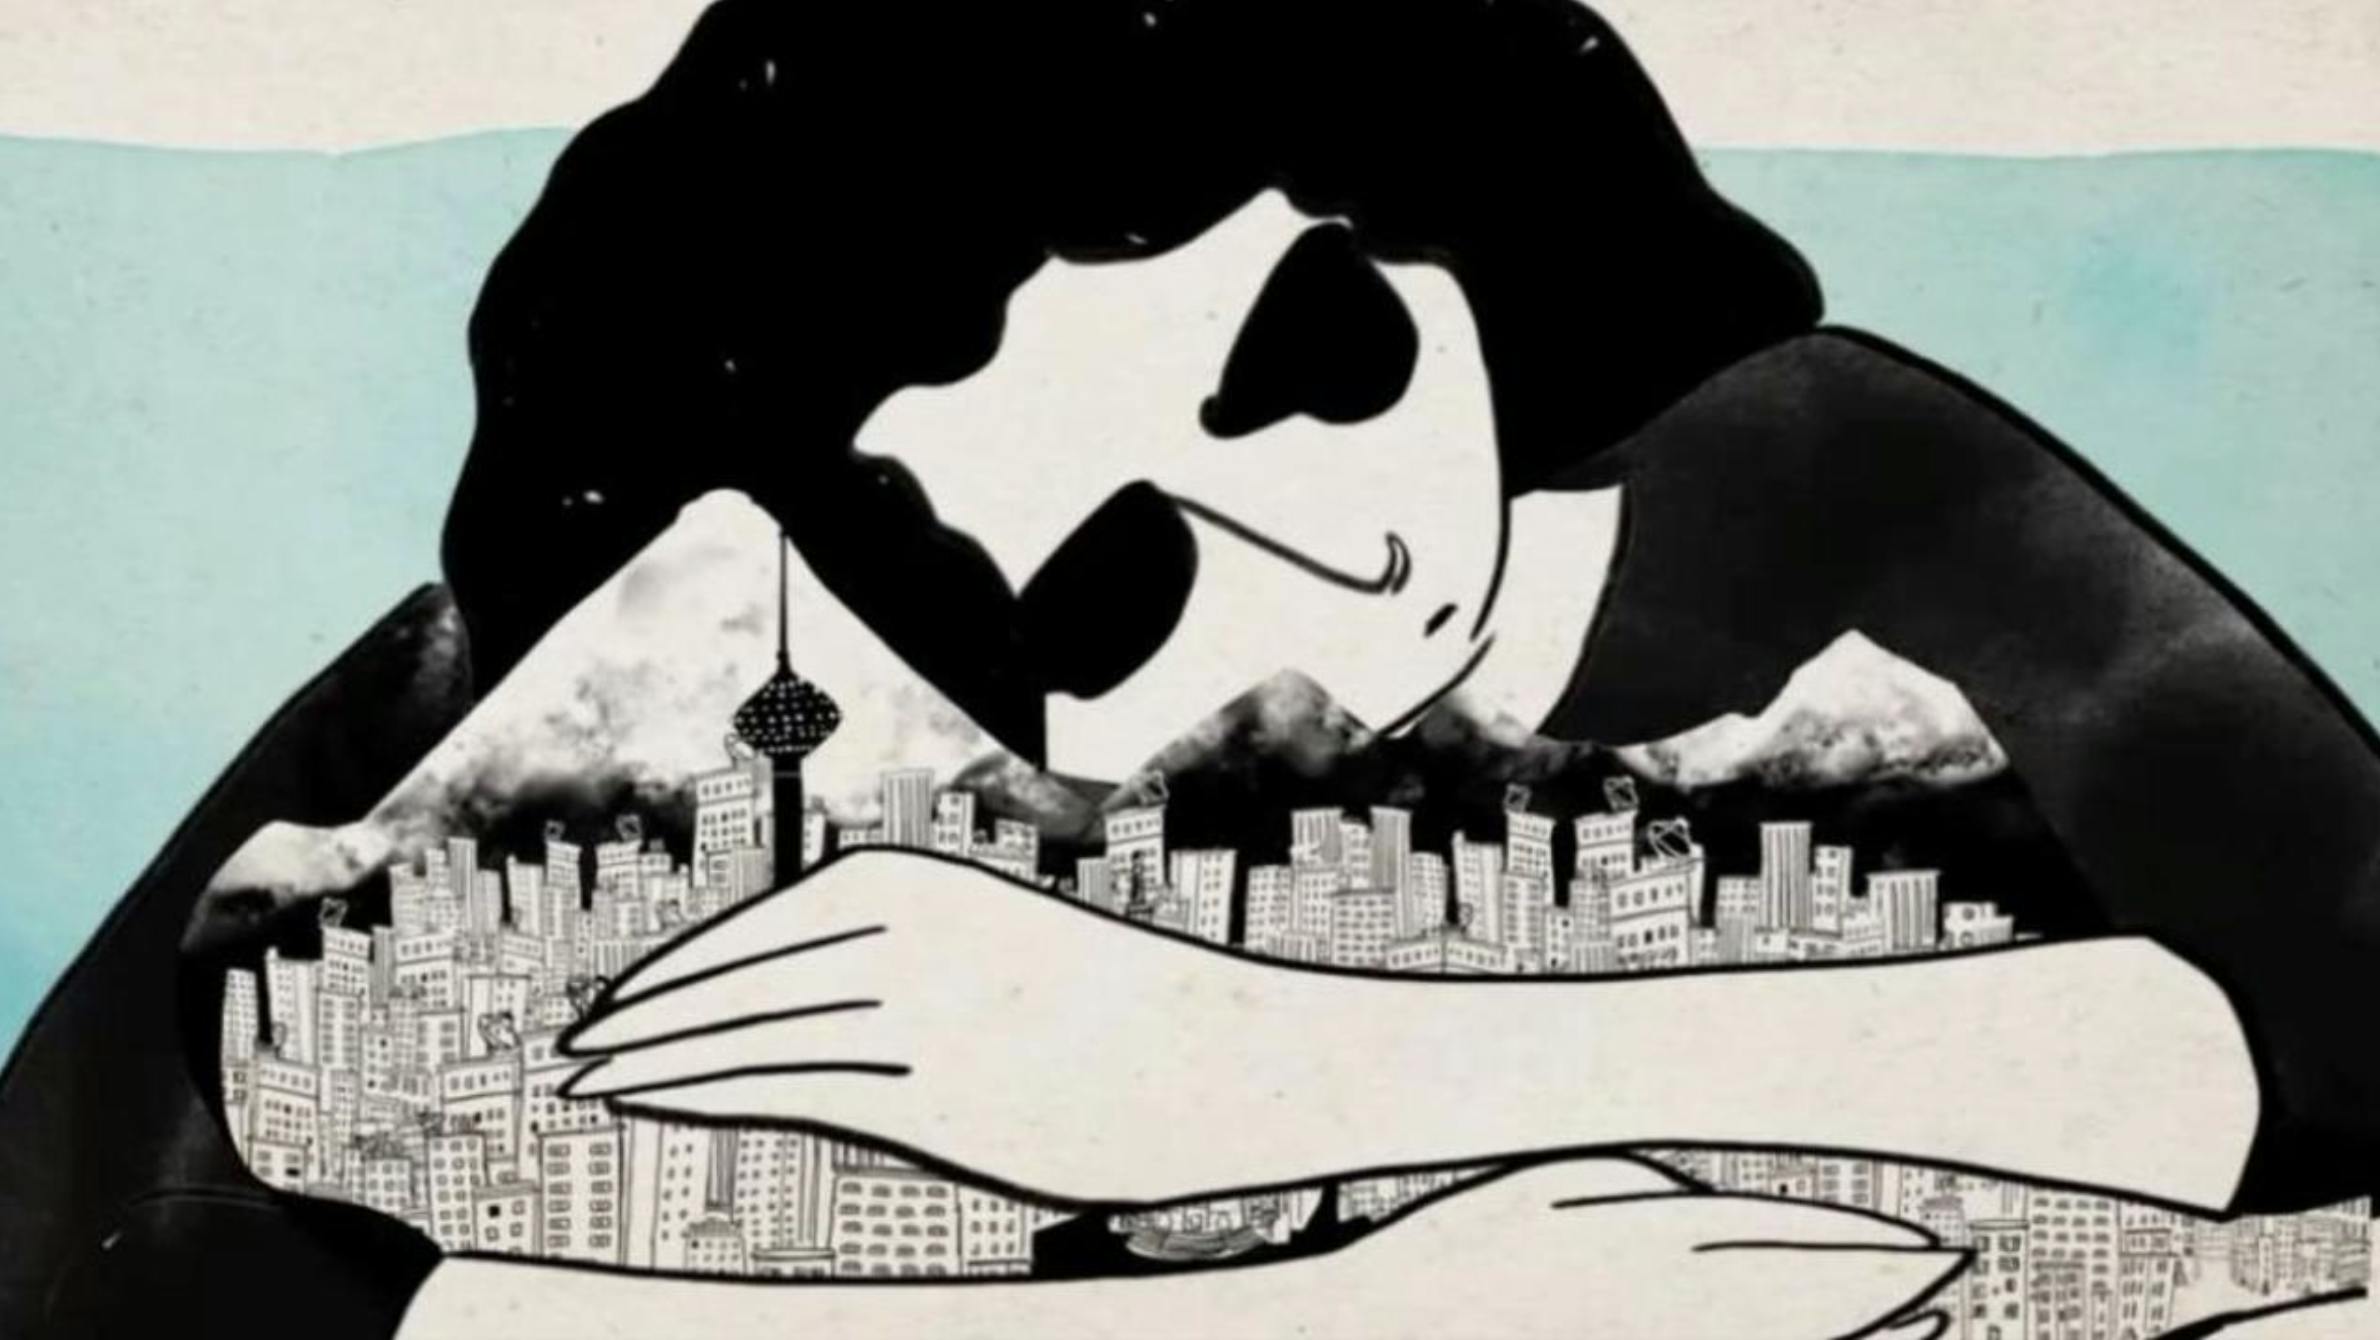 A girl cradles a city in her arms.